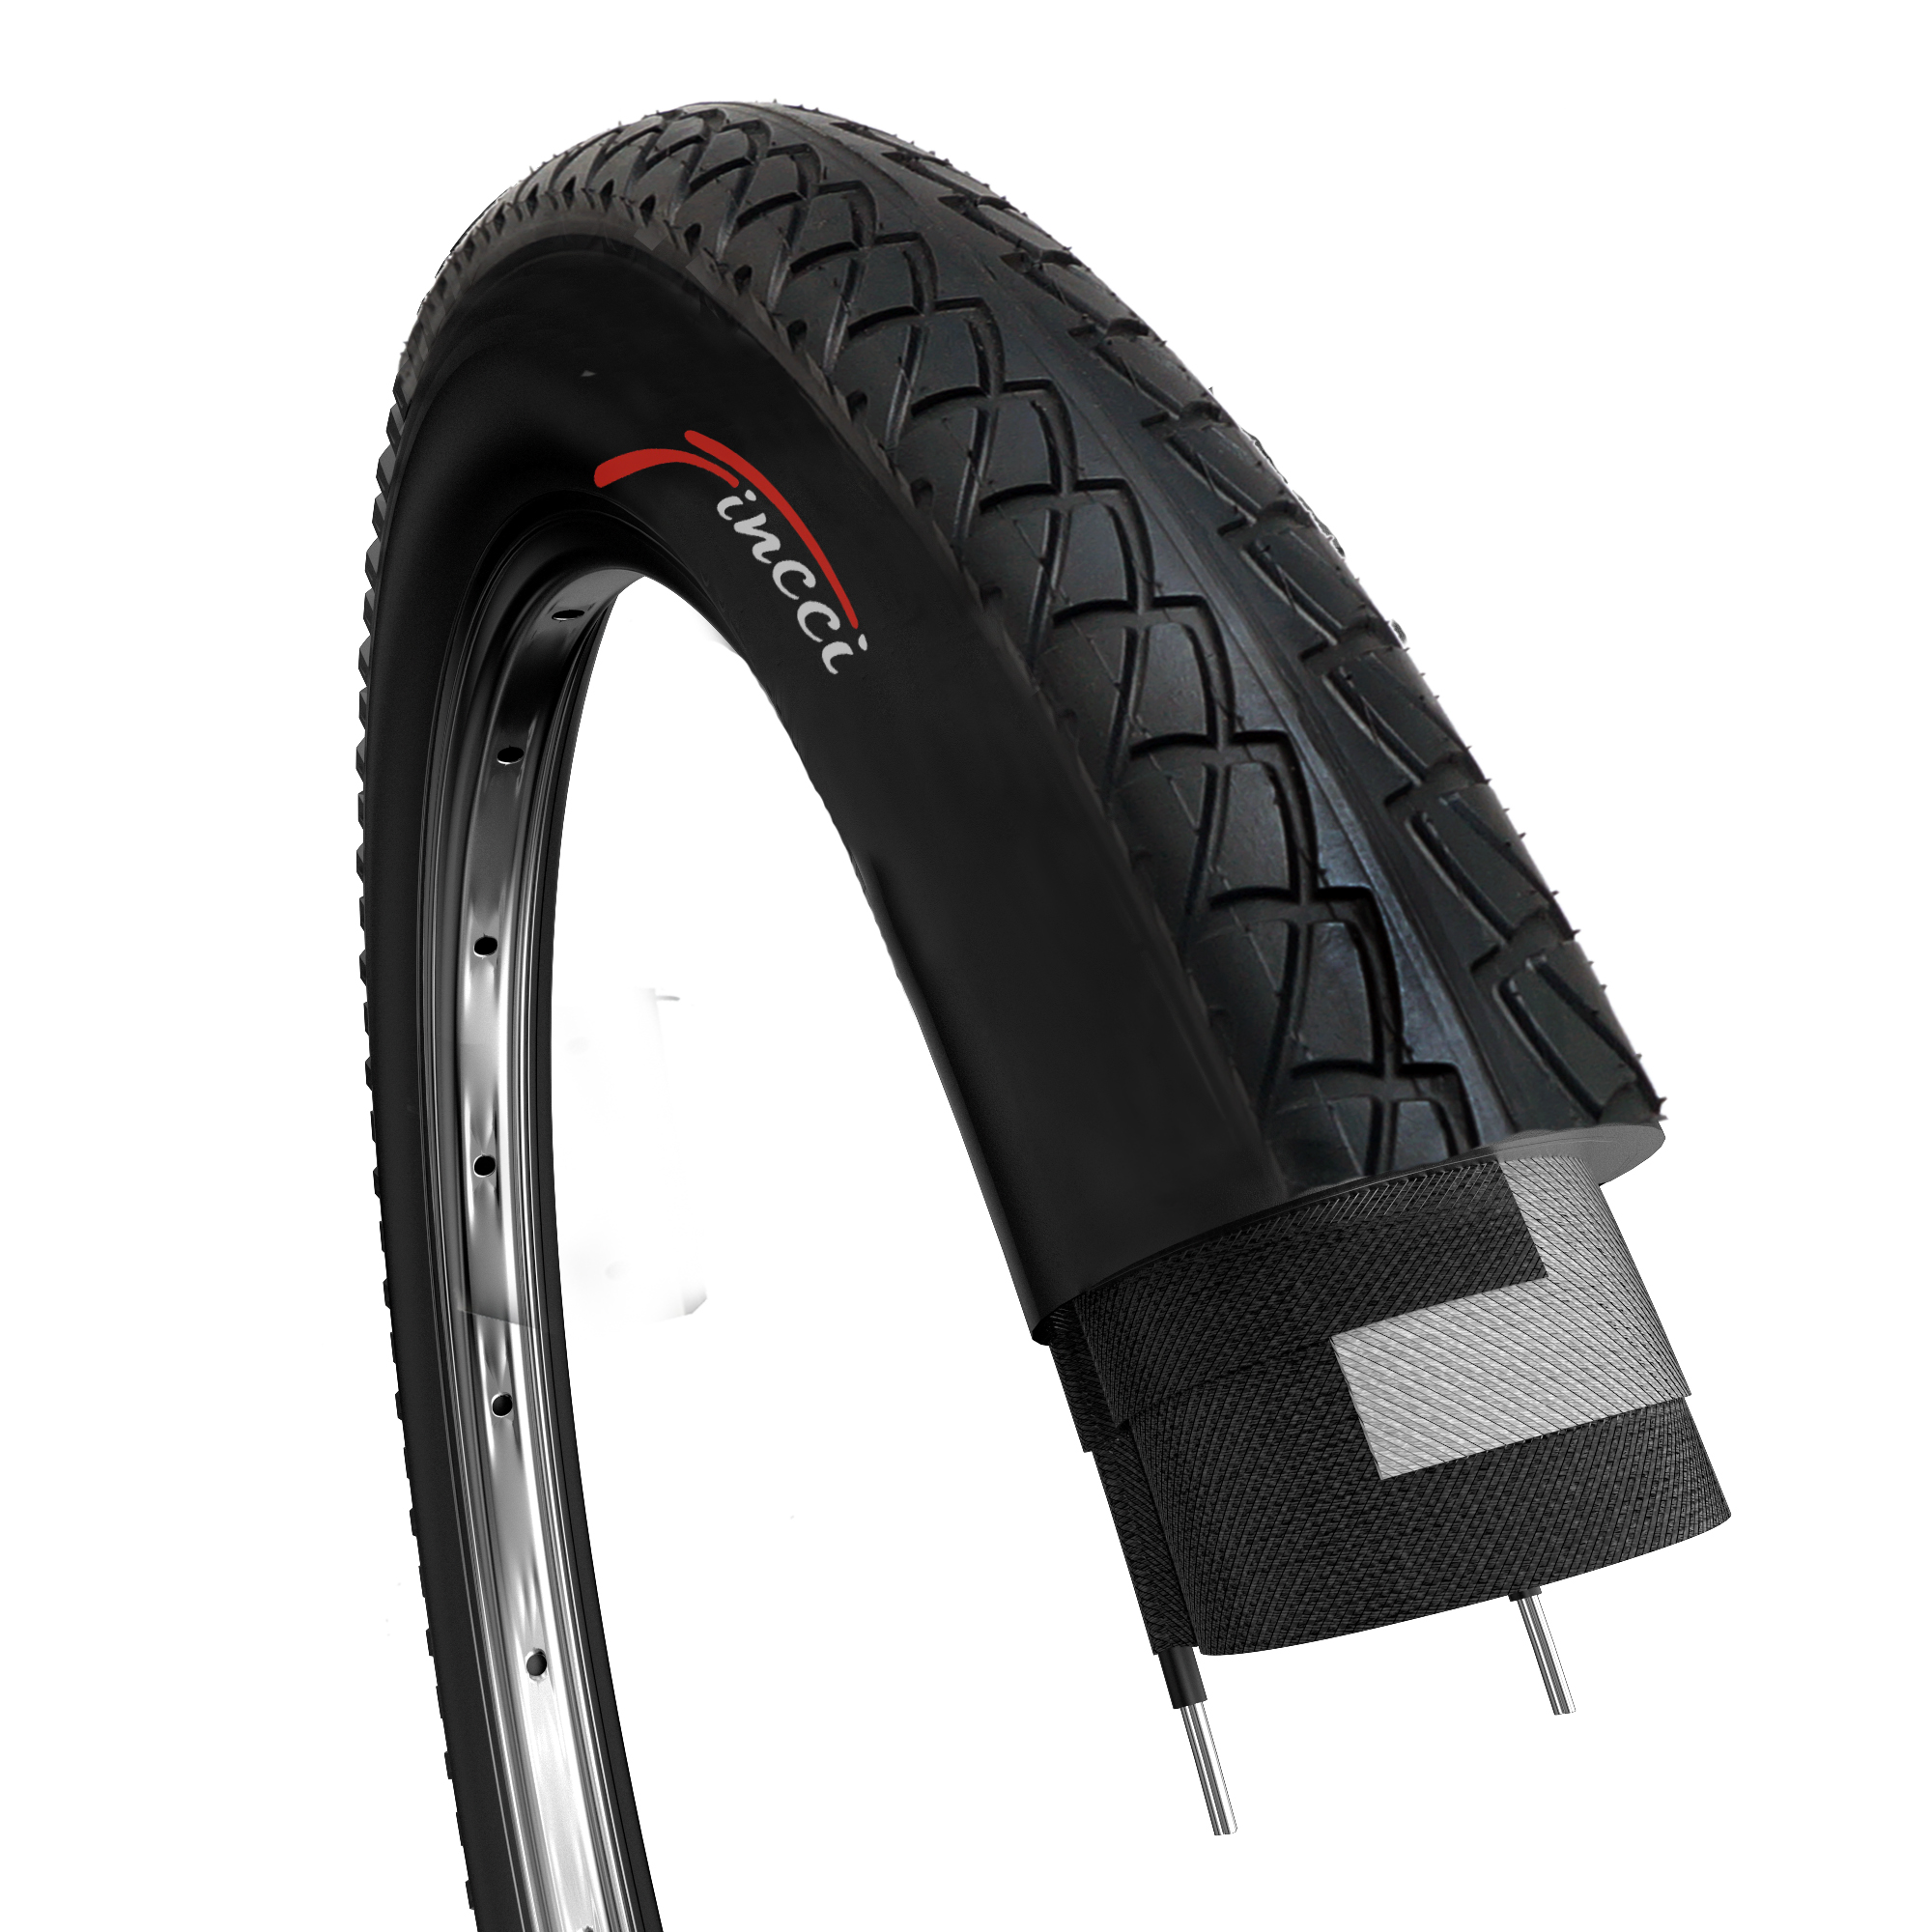 26”x 2.10" SCHWALBE JIMMY PERFORMANCE LINE FOLDING ATB TYRE NEW BOXED BARGAIN 